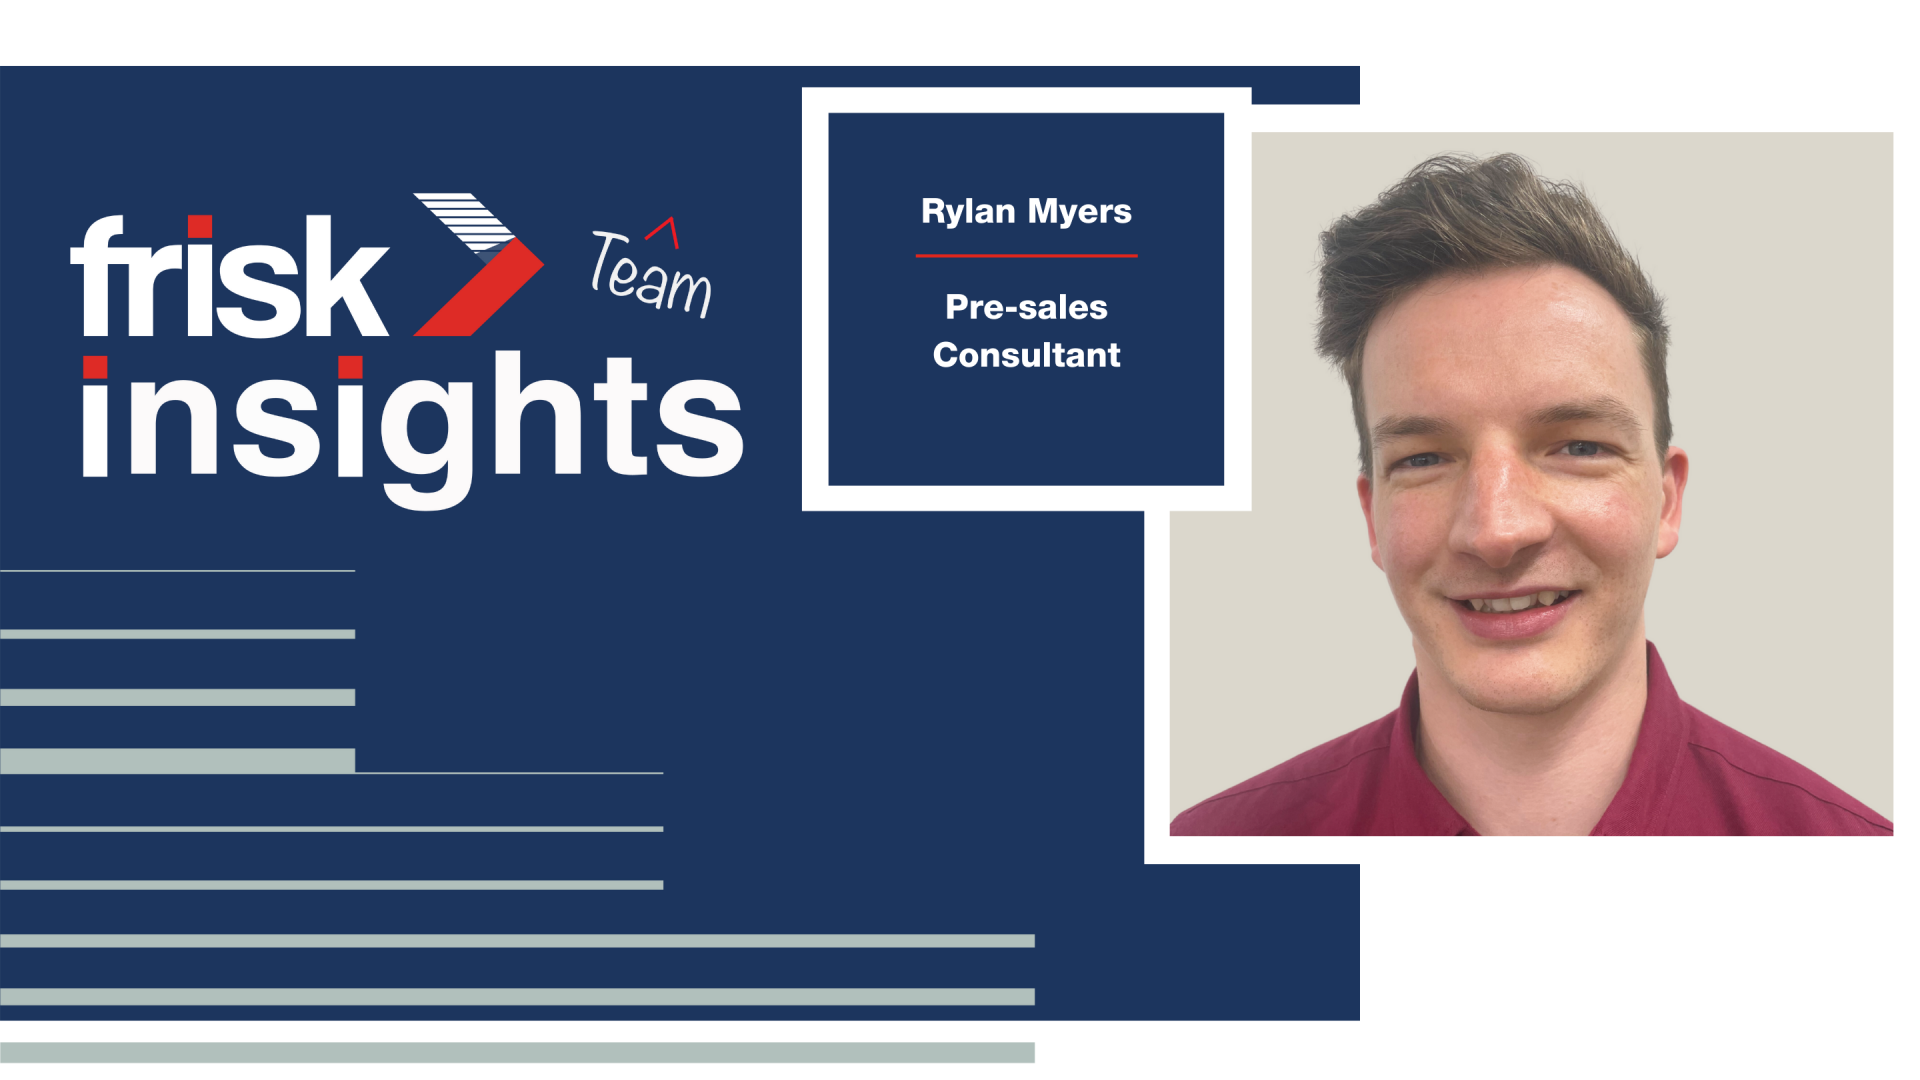 Frisk Team Insights: Rylan Myers, Pre-sales Consultant